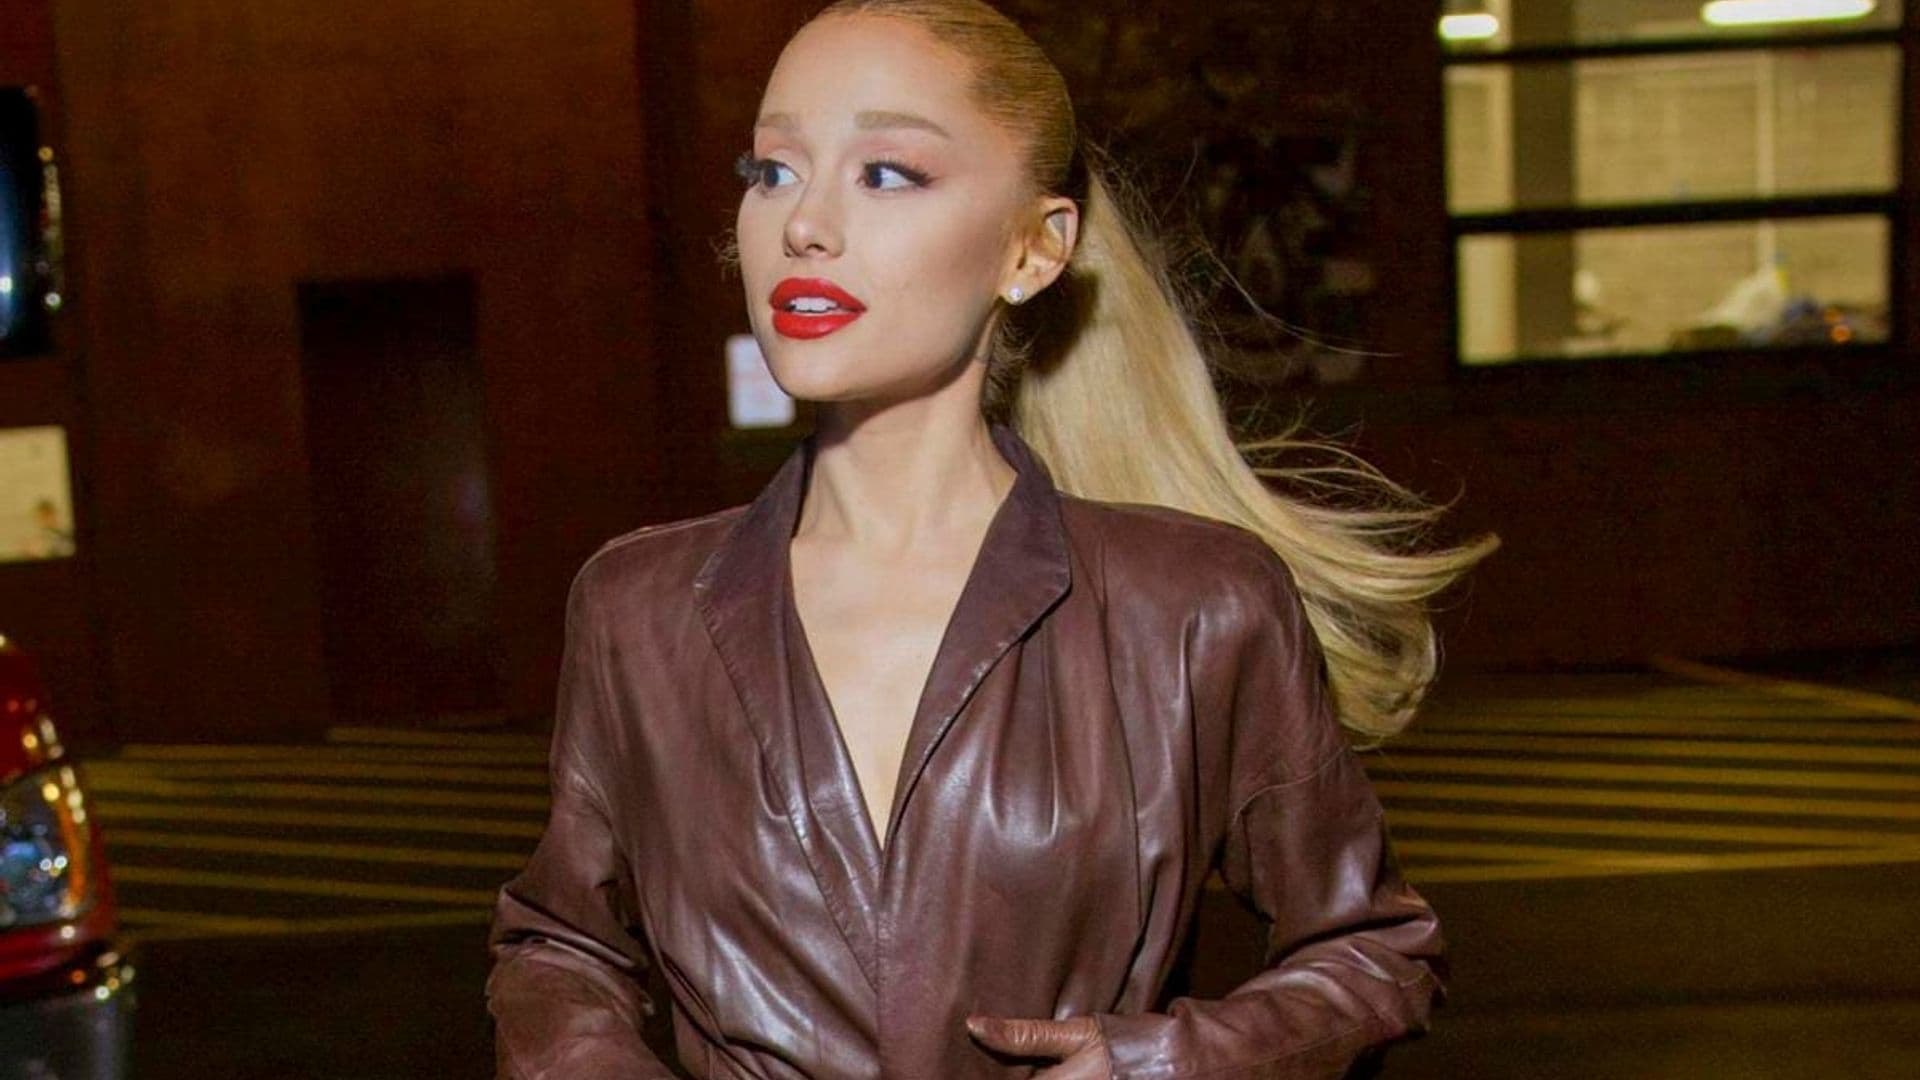 Ariana Grande defends her romantic relationship in new song: ‘Why do you care so much?’